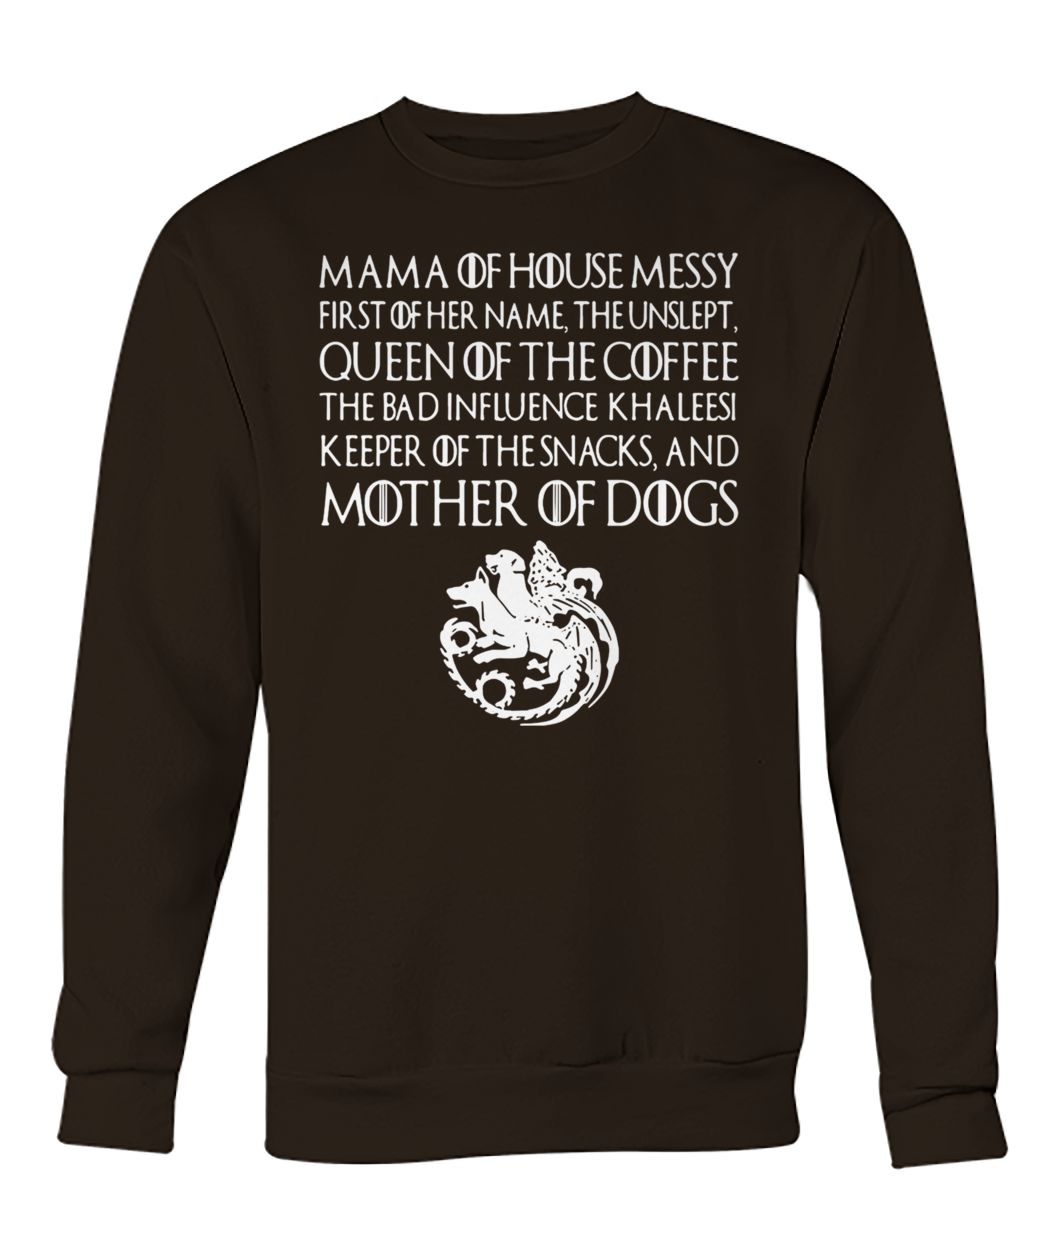 Game of thrones mama of house queen of the coffee mother of dogs crew neck sweatshirt